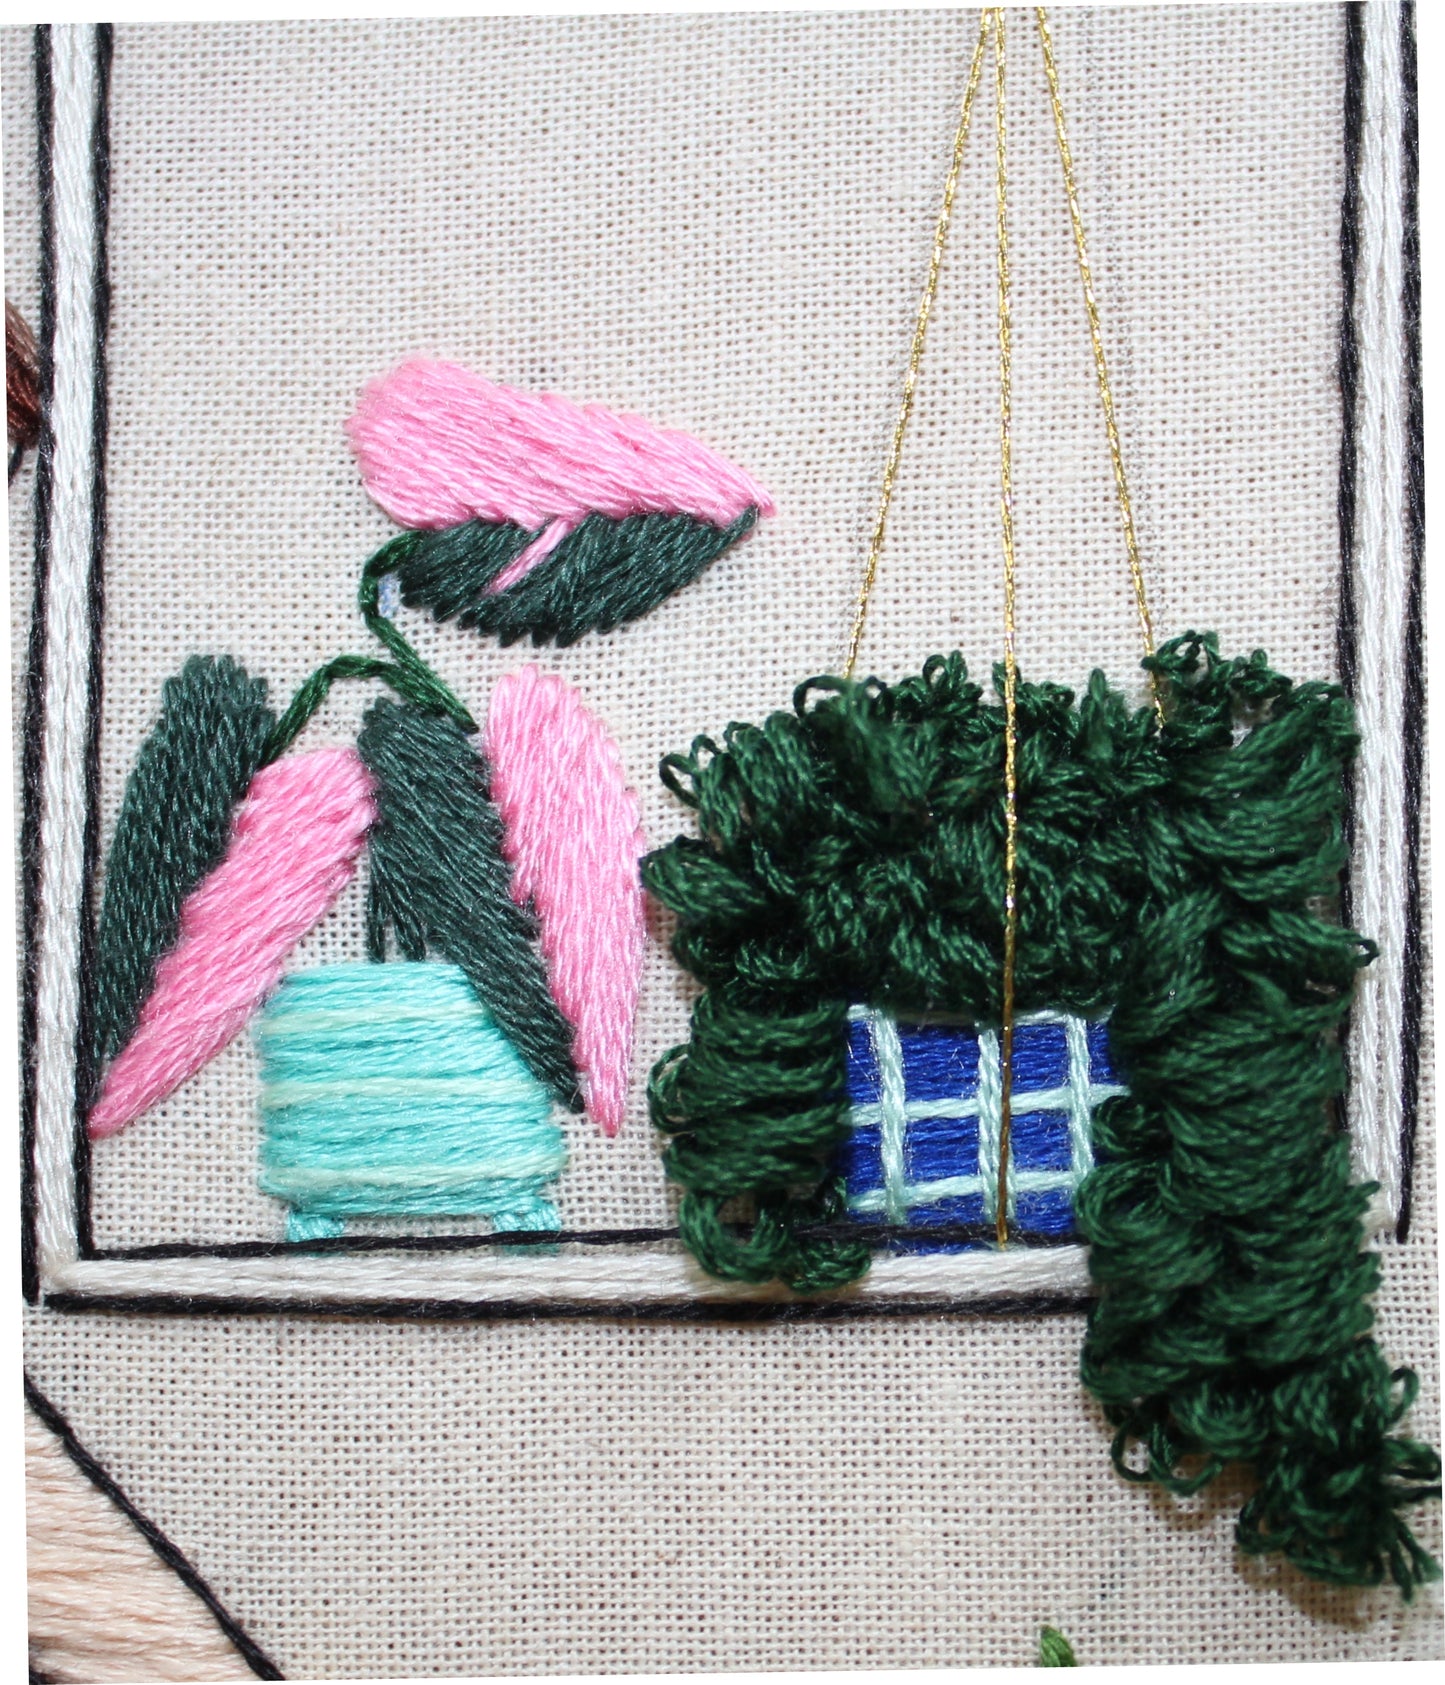 Plant Lady in Watering Duties Handmade Embroidered House Plant